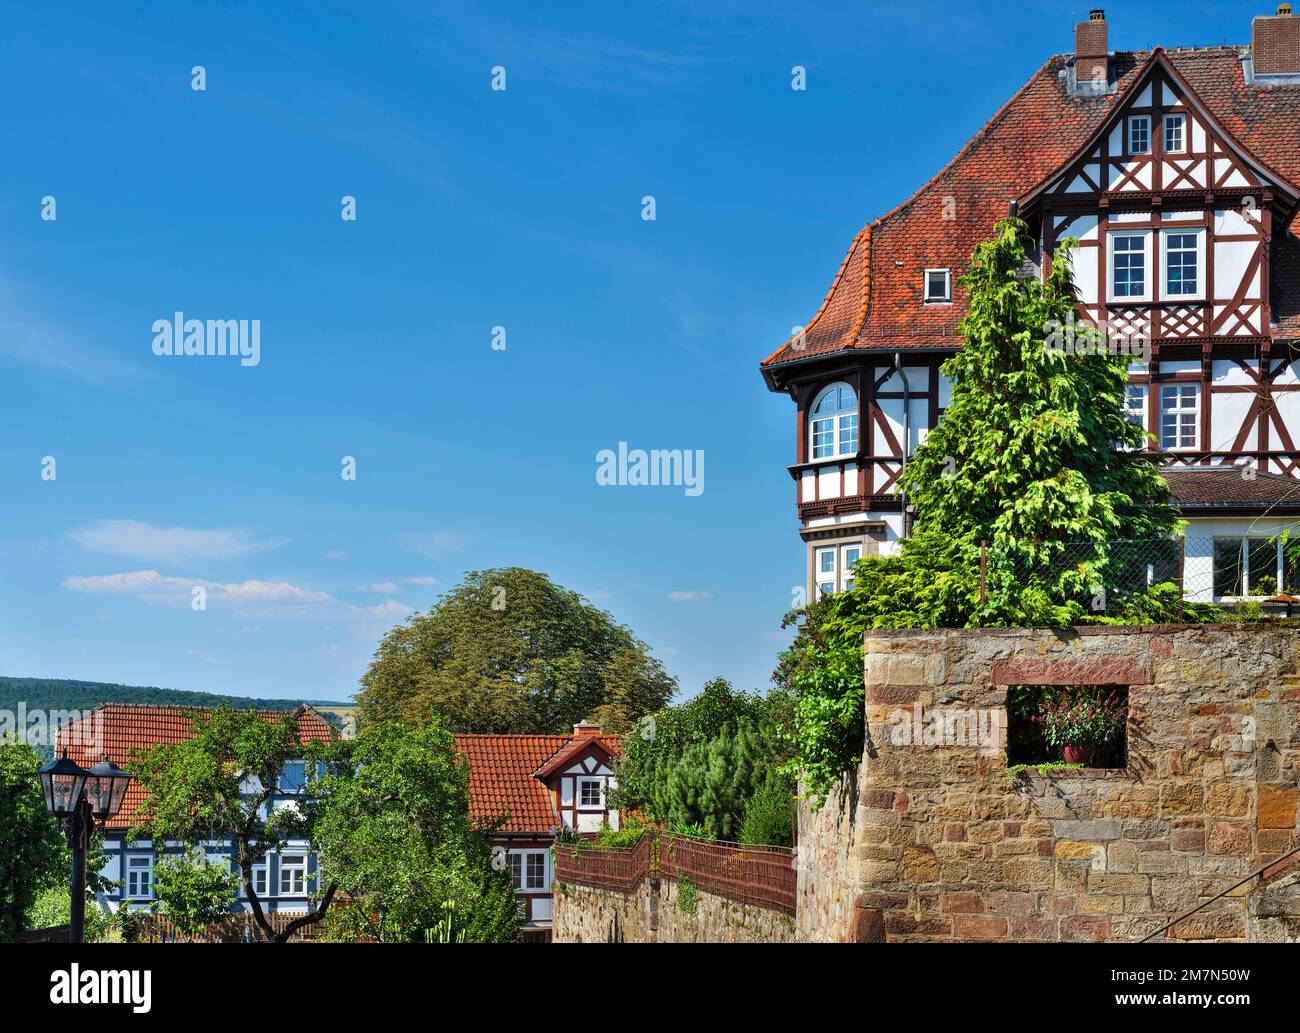 Europe, Germany, Hesse, Schwalm-Eder county, town Fritzlar, German Half-Timbered Houses Route, half-timbered houses at the goat mountain, view to the west Stock Photo